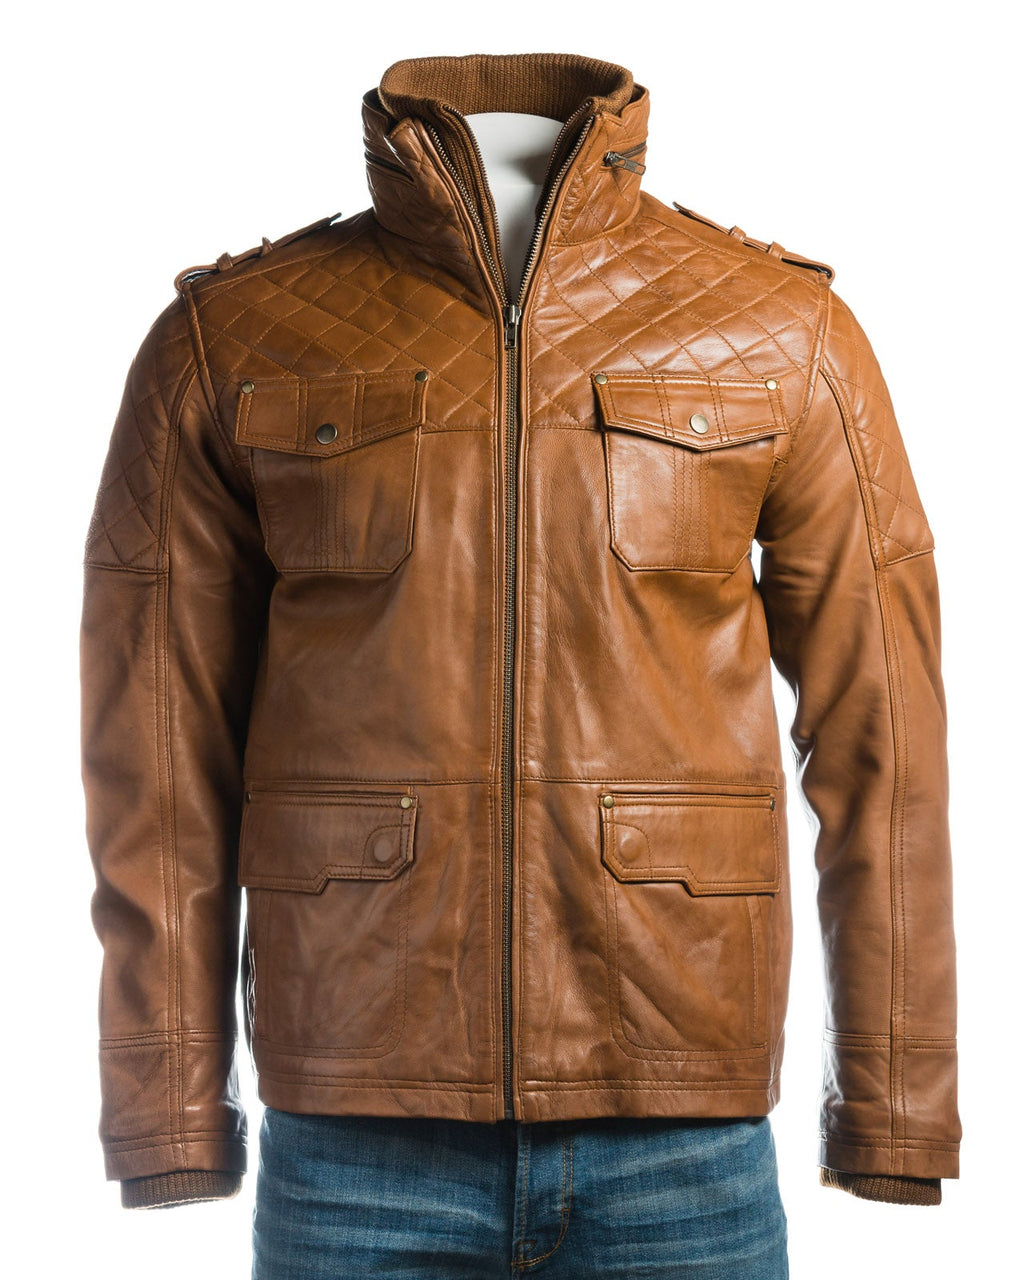 Men's Cognac Mid Length Leather Jacket With Double Collar Shoulder Stitch Detail: Orlando